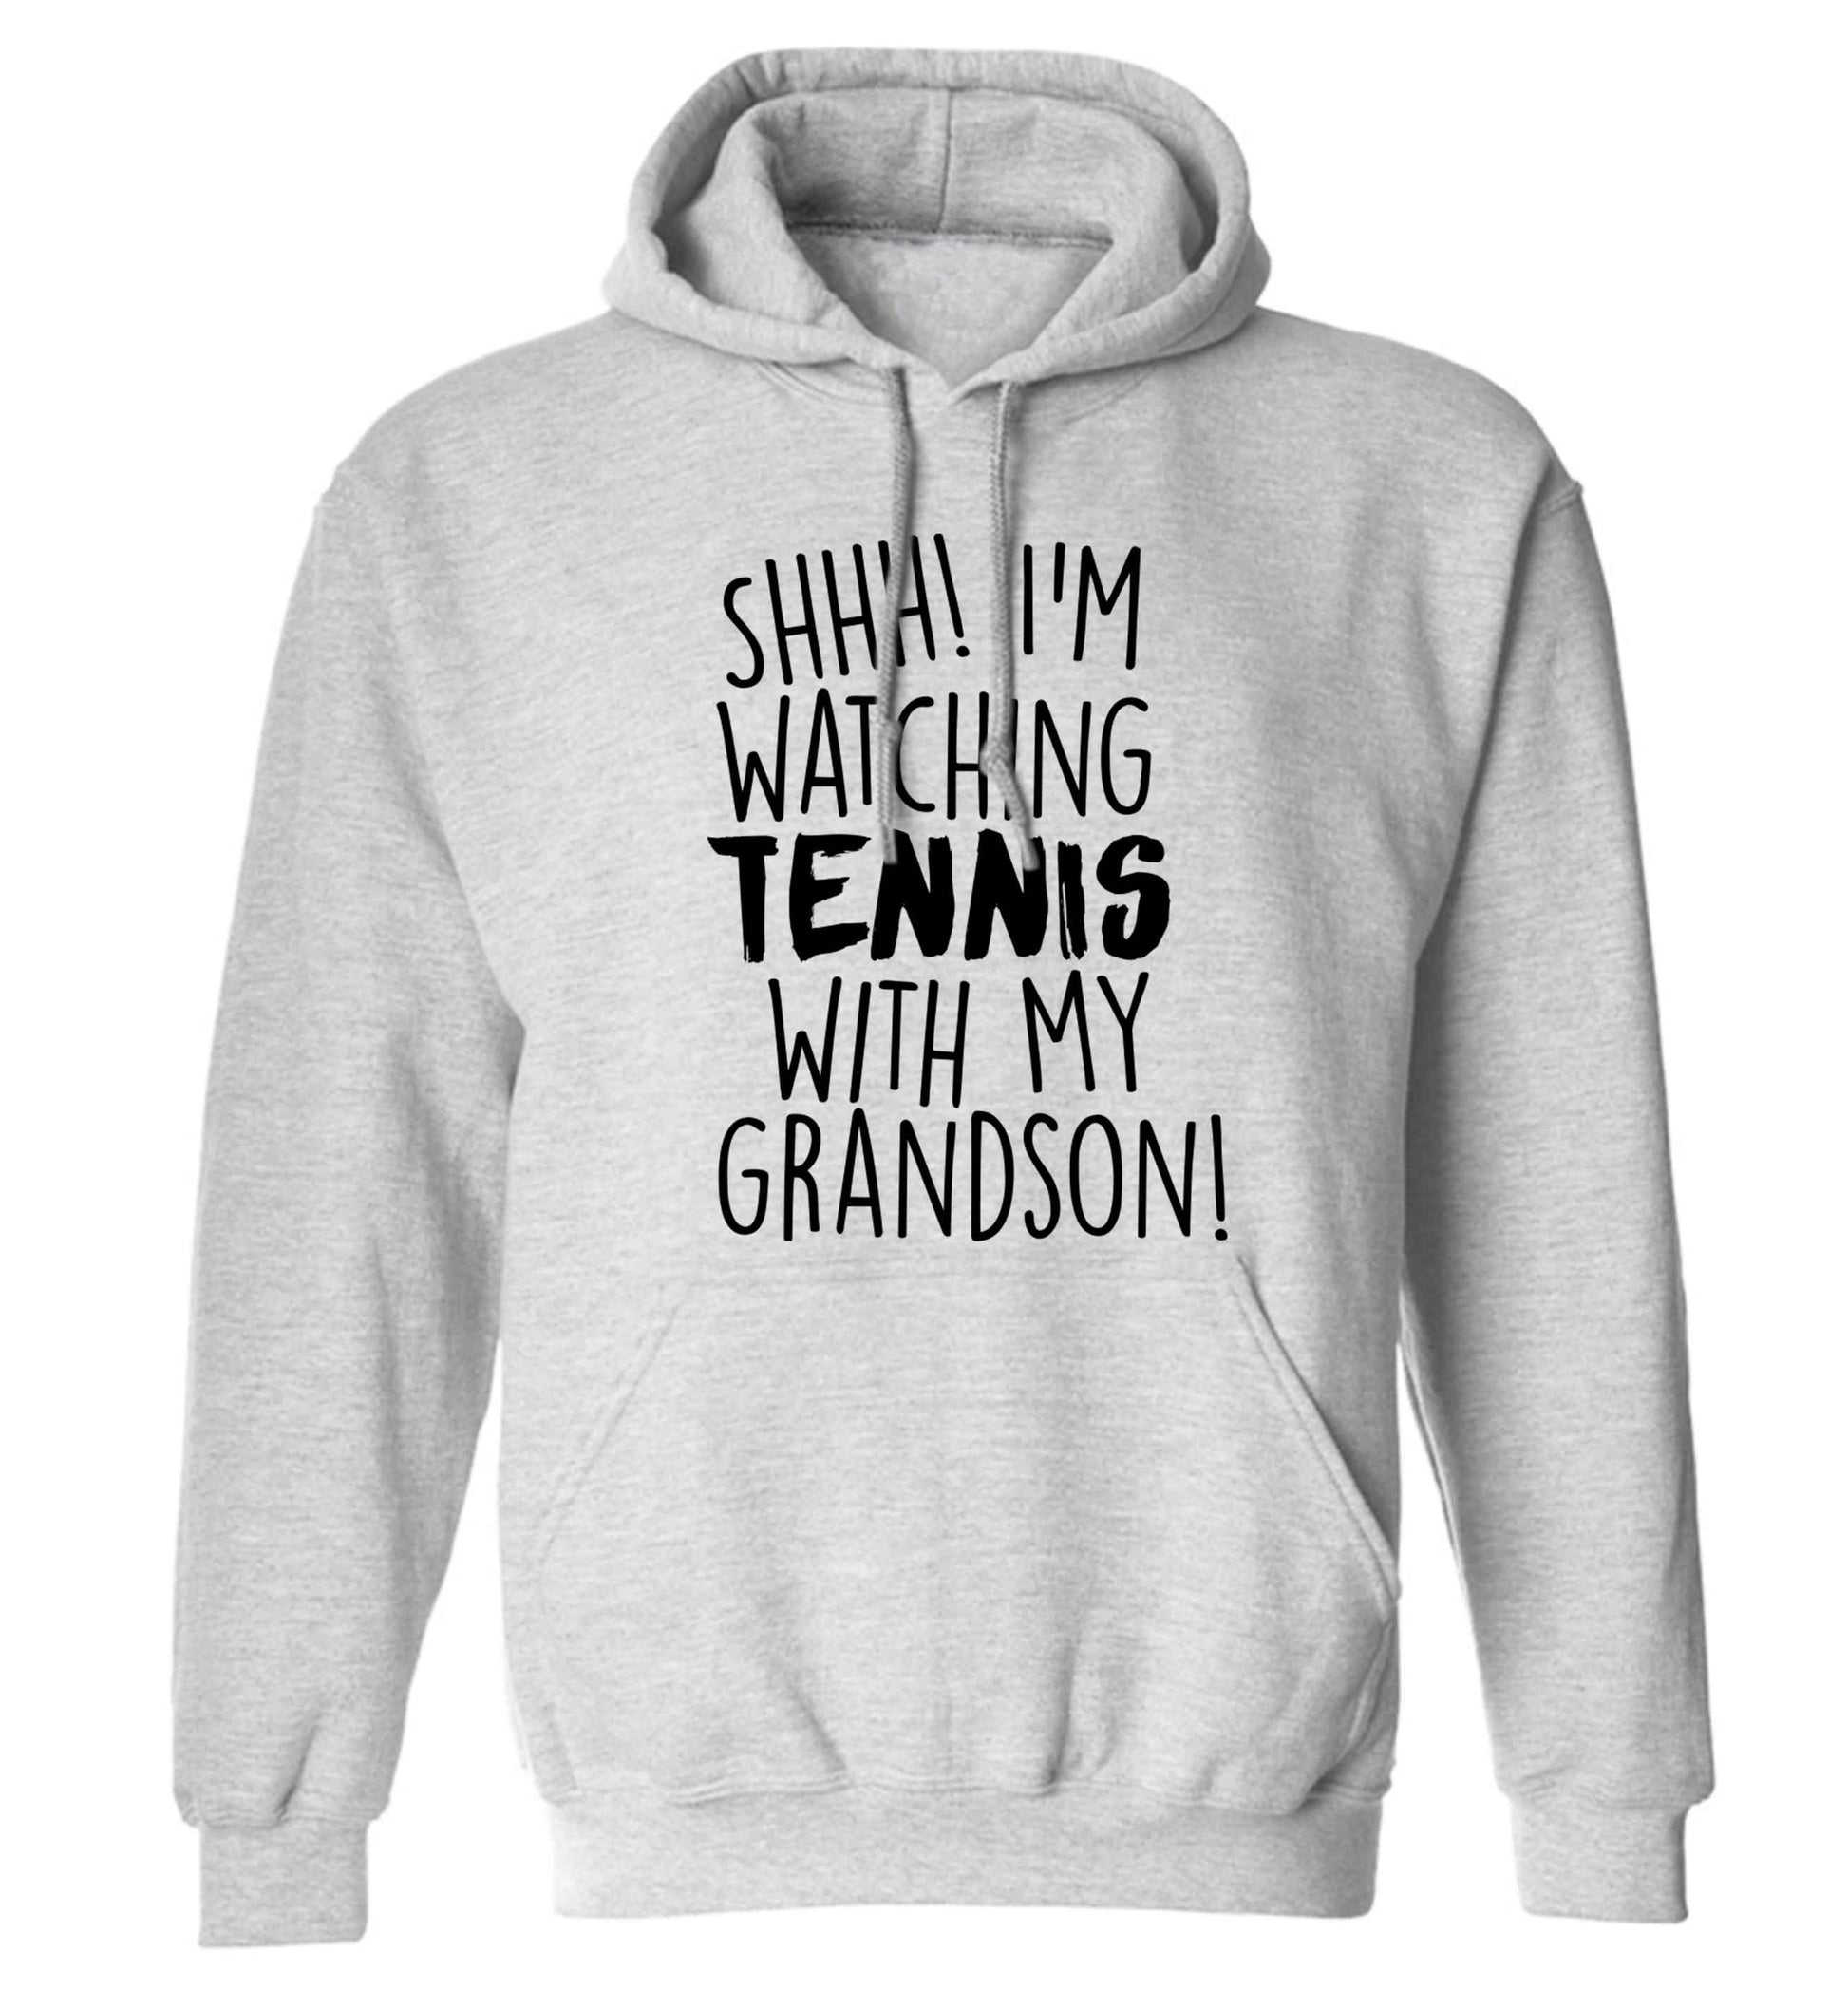 Shh! I'm watching tennis with my grandson! adults unisex grey hoodie 2XL